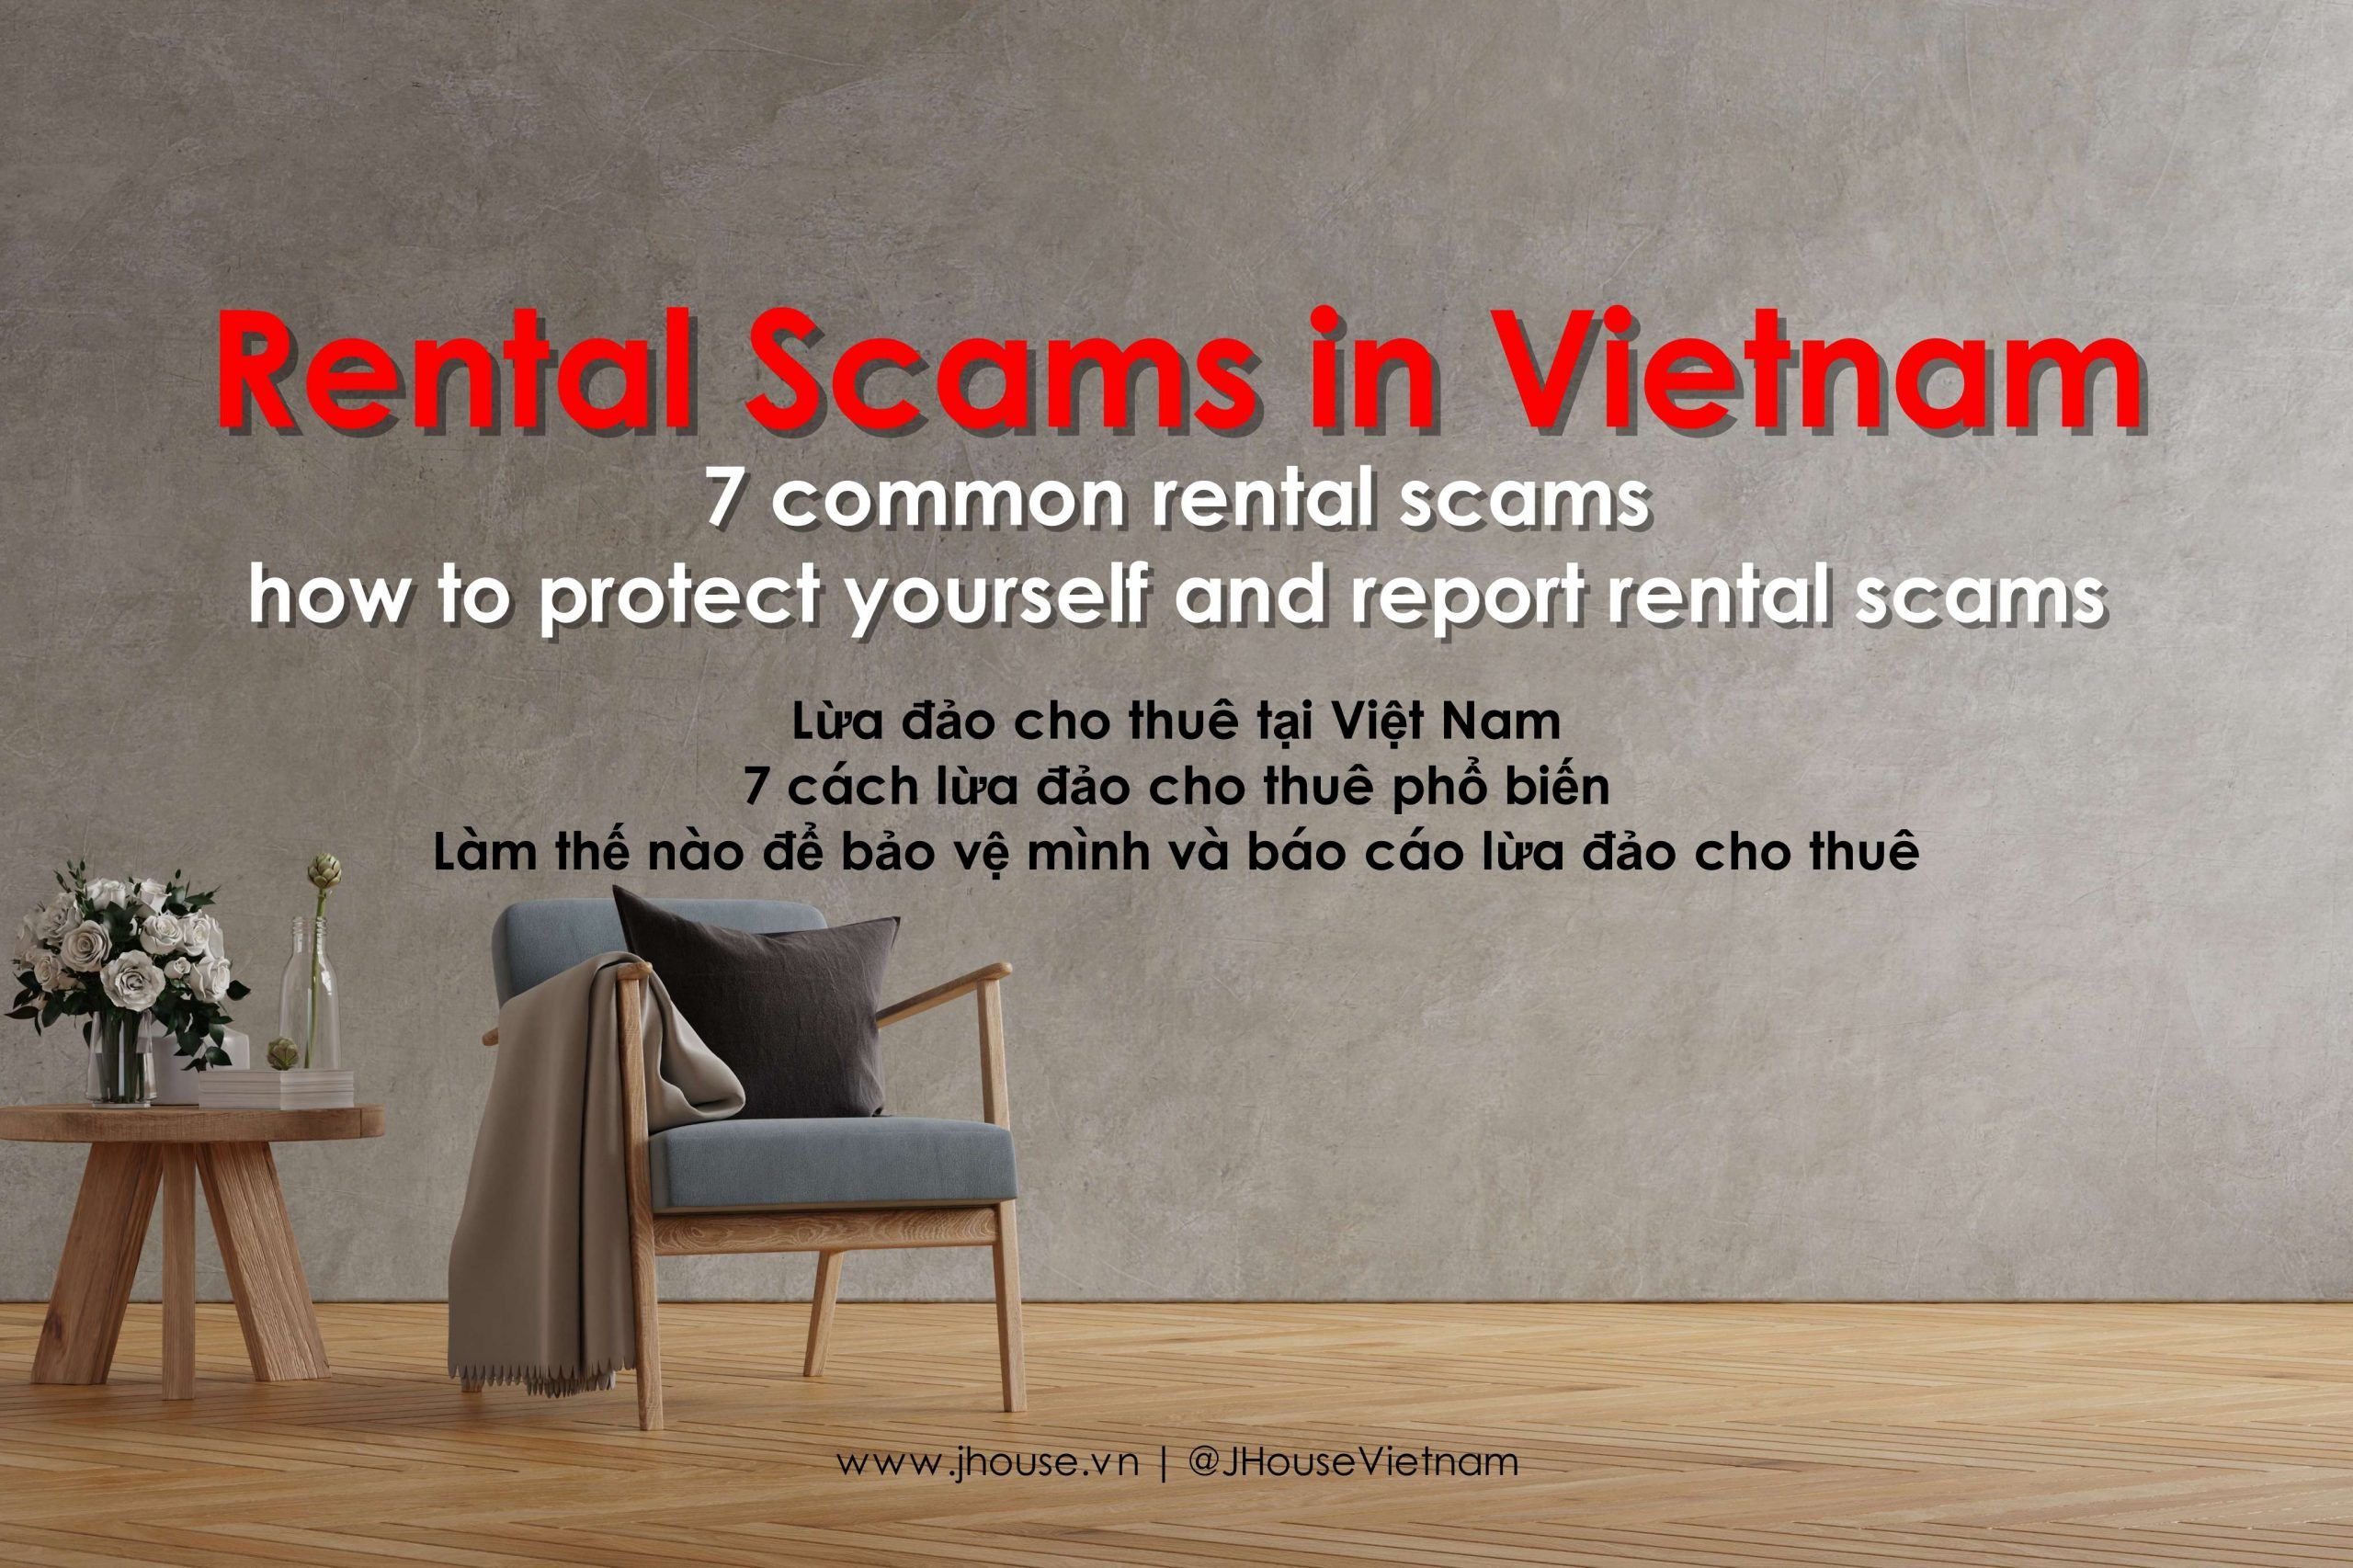 Rental Scams 7 common rental scams how to protect yourself and report rental scams JHouse.vn scaled